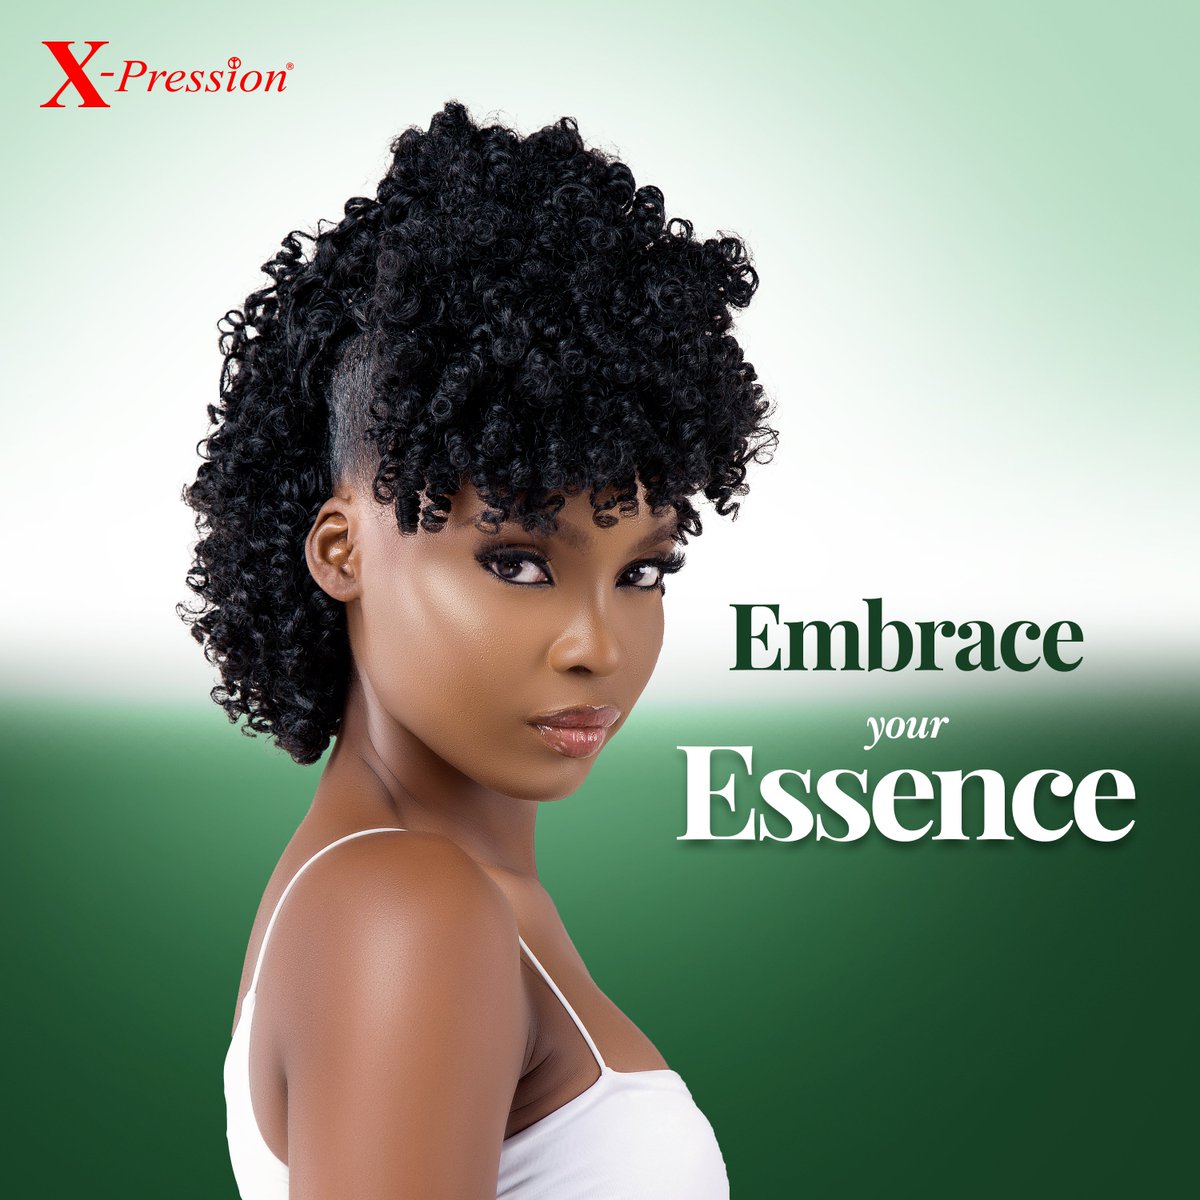 Embrace your essence with confidence and style this week!✨ Let your beauty shine with X-Pression Braids, because every strand tells a story. 💖 Product Featured: Vogue Curl Color: #1 #xp4you #xpression #xpressionhair #monday #voguecurl #newweek #confidence #essence #curls